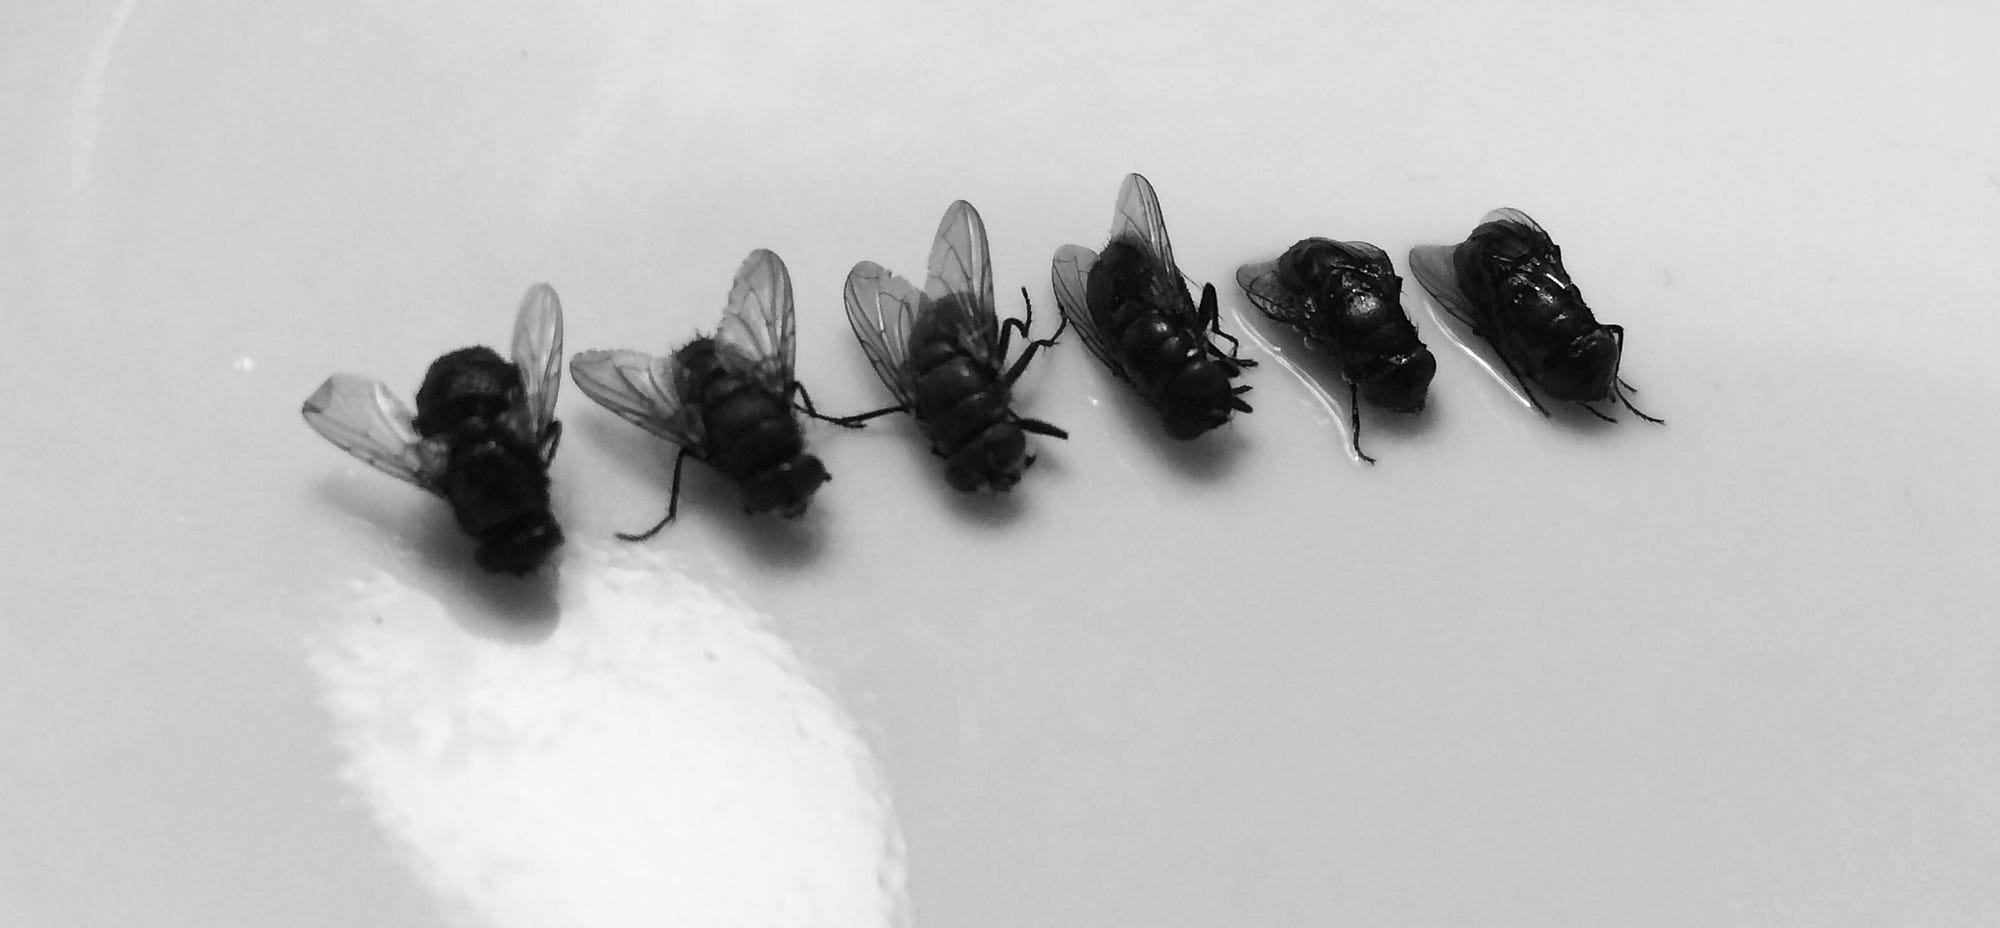 10 Effective Ways to Get Rid of Houseflies at Home Naturally and Safely